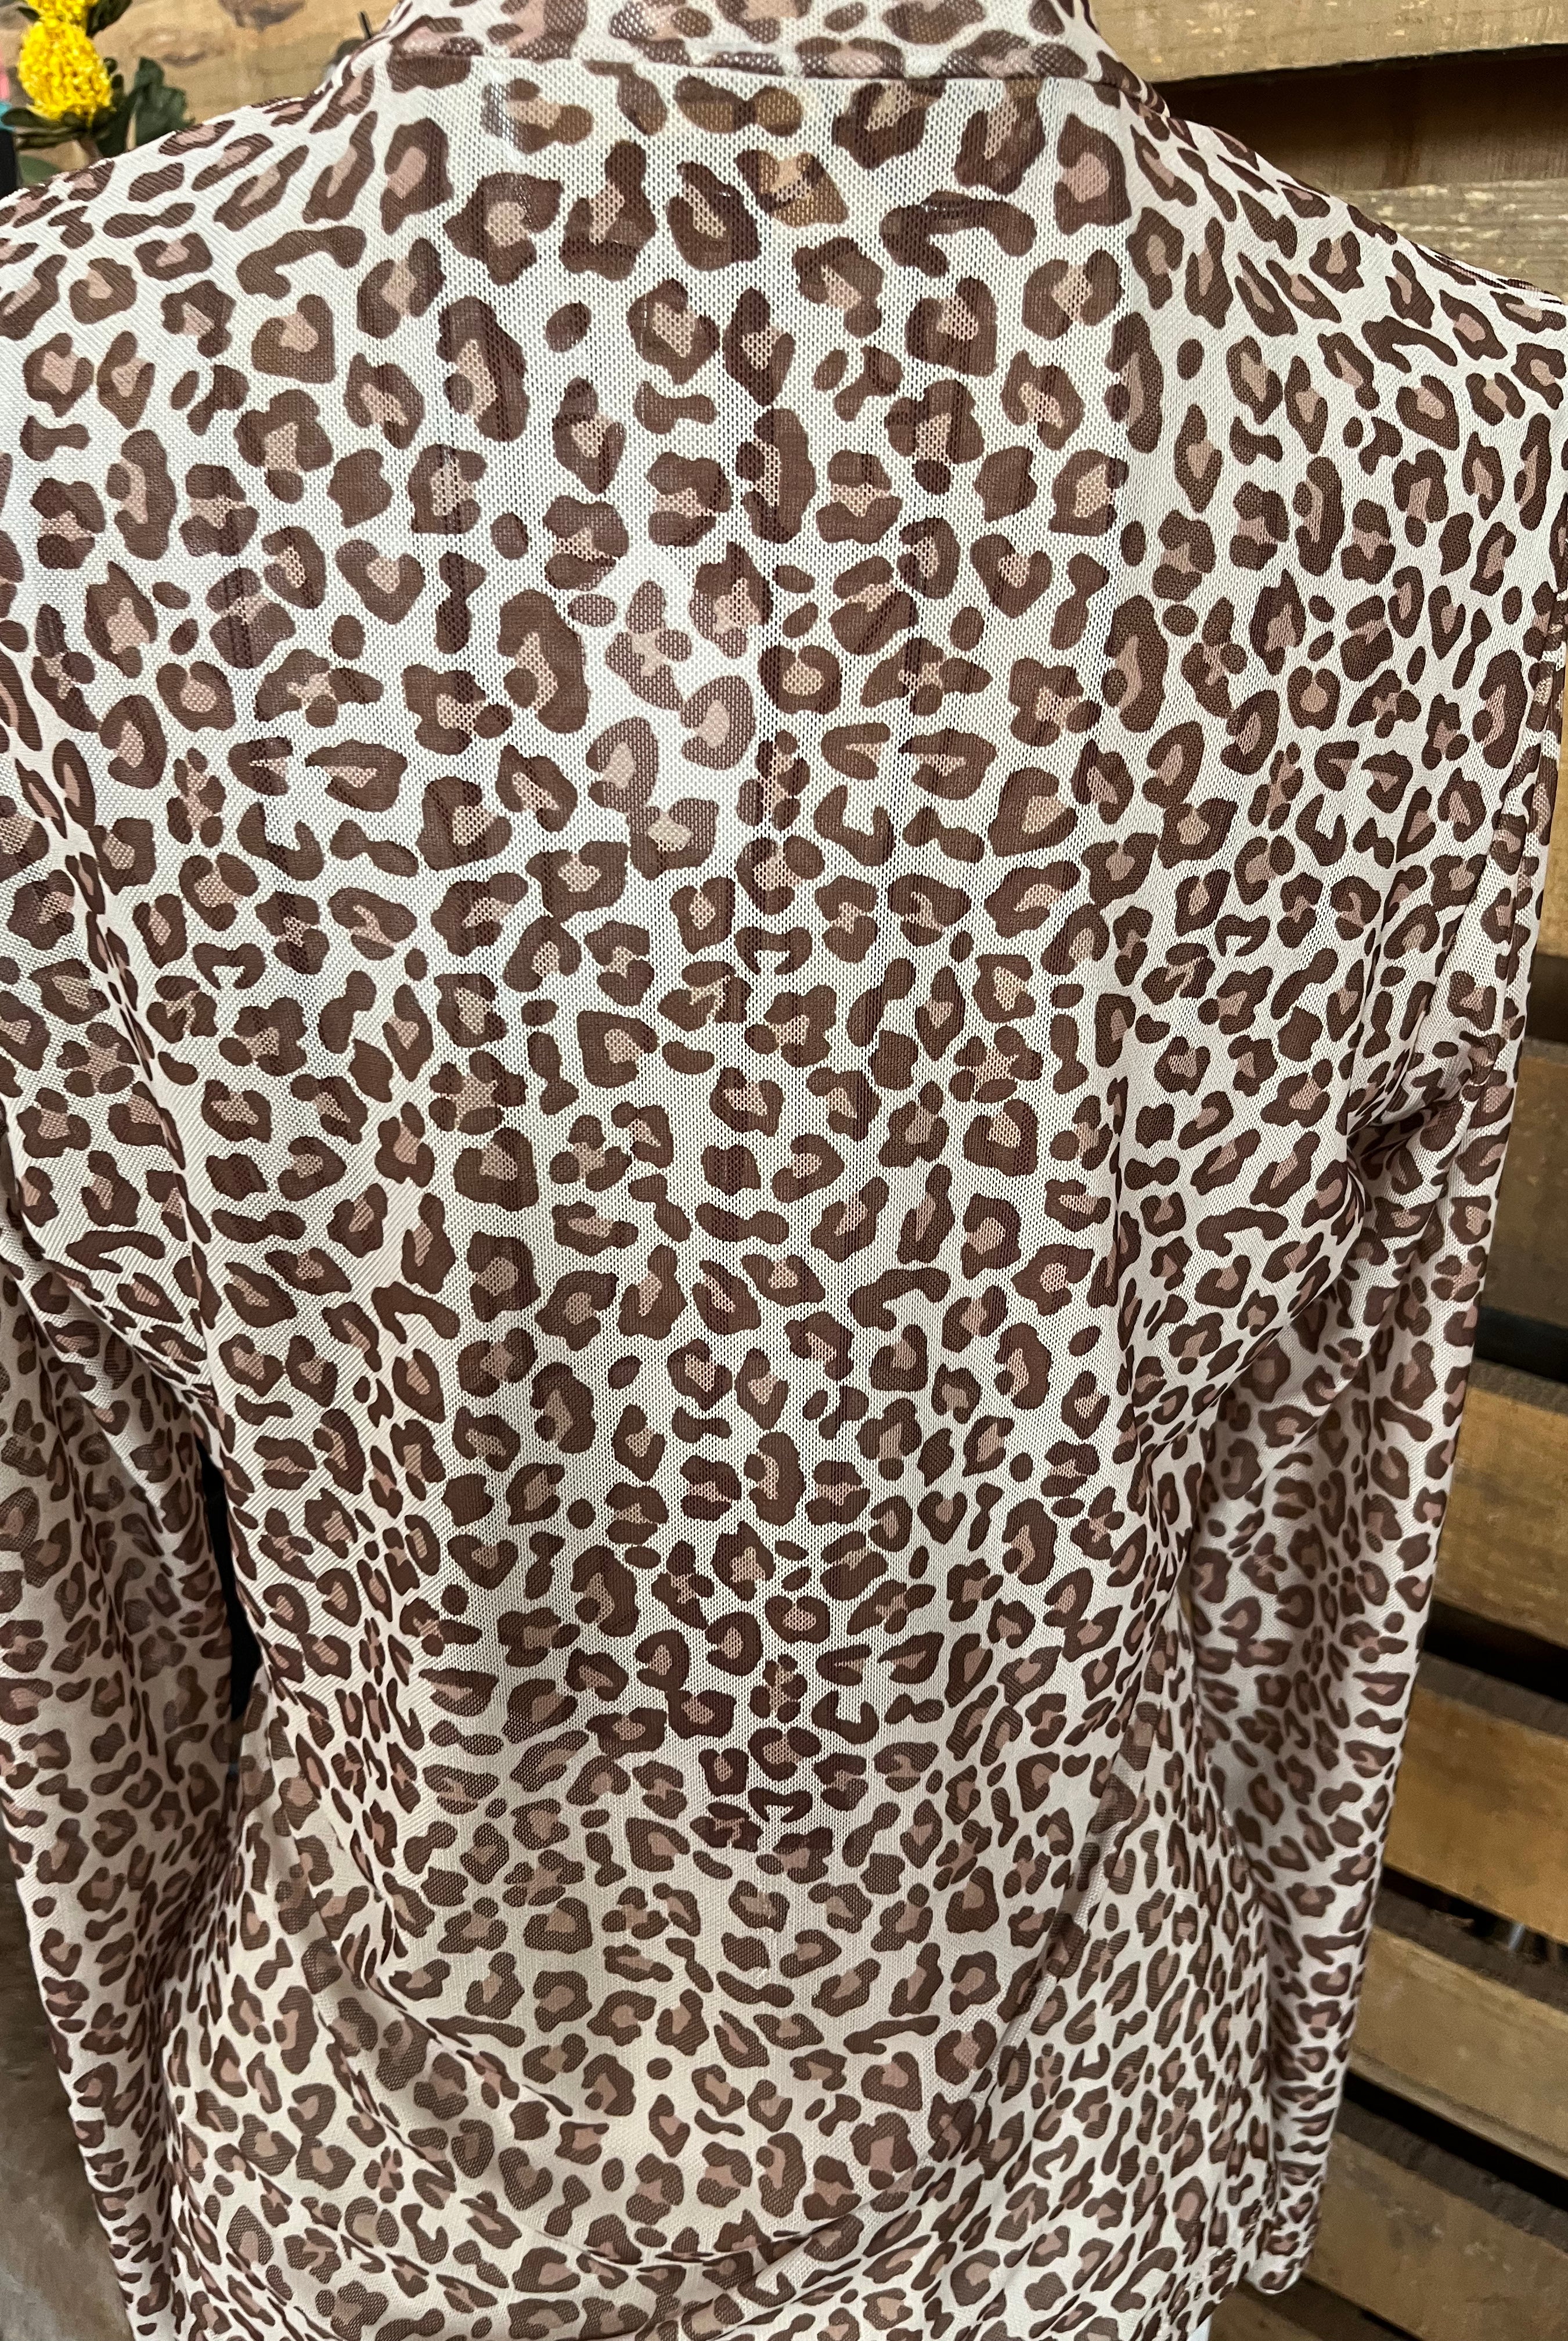 Leopard Mesh Top / Stuffology Boutique-Tops-Turquoise Haven-Stuffology - Where Vintage Meets Modern, A Boutique for Real Women in Crosbyton, TX